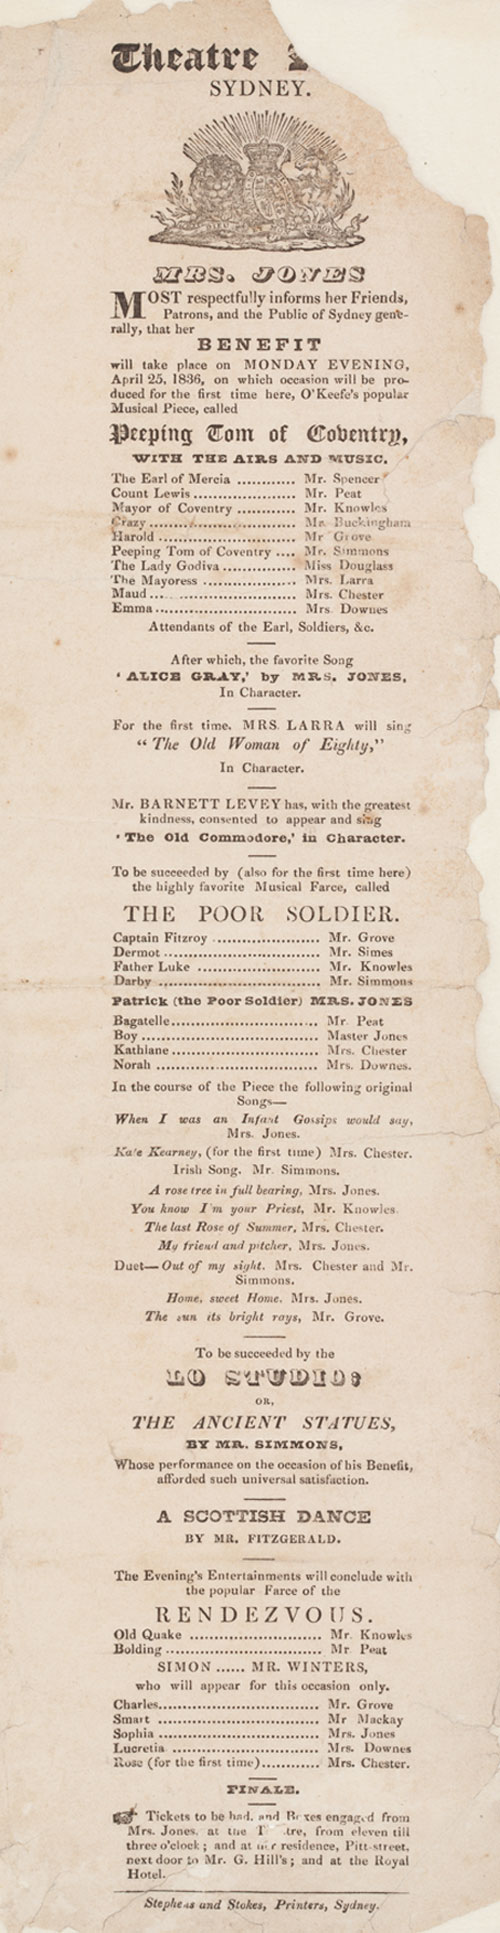 Theatre Broadside: Benefit: Mr Barnett Levey as 'The Old Commodore' in Character, 25 April 1836,  Theatre Royal, Sydney, printed. 